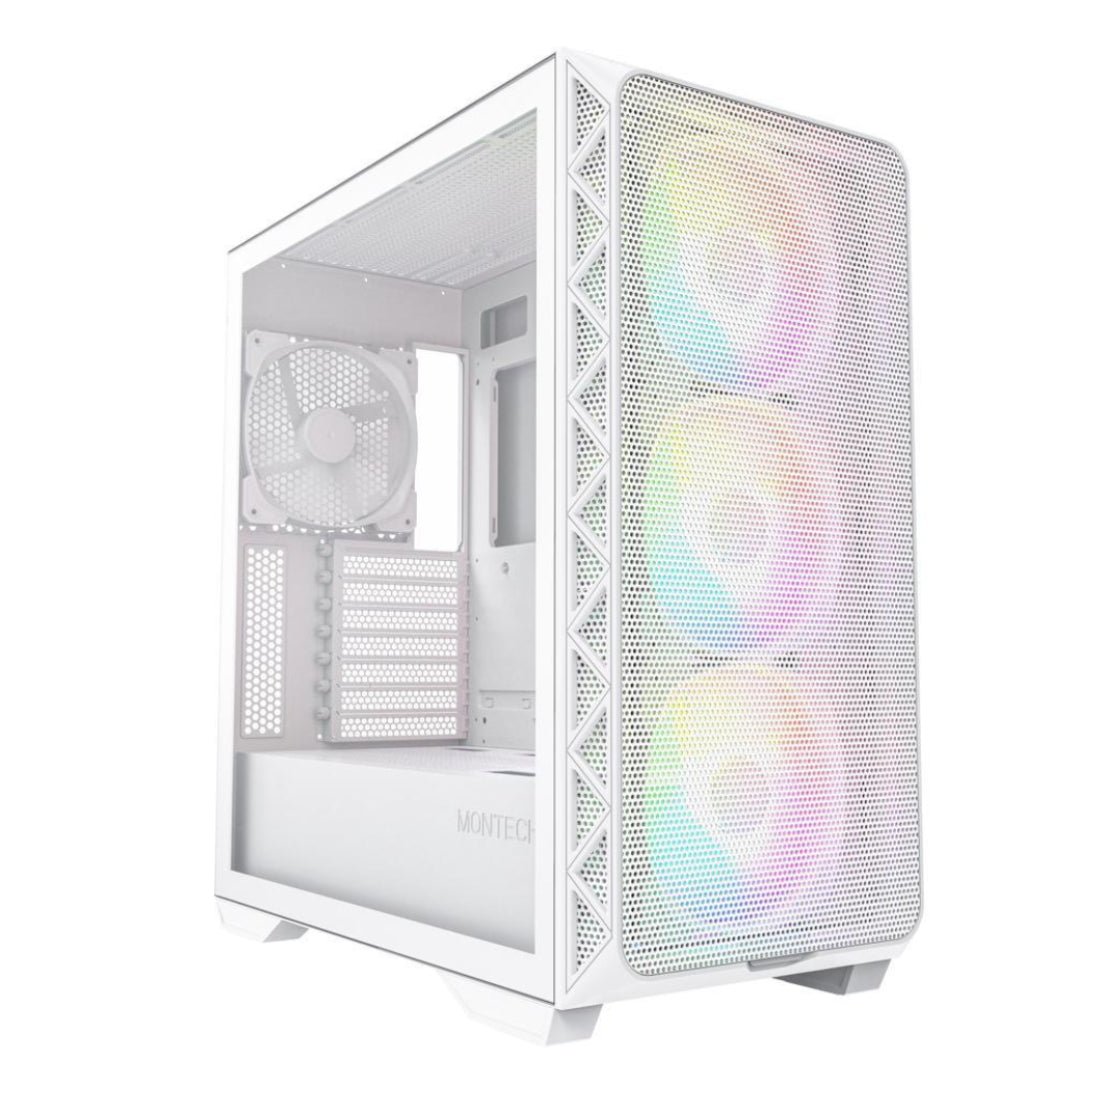 Montech Air 903 Max Tempered Glass E-ATX Mid-Tower Case - White - صندوق - Store 974 | ستور ٩٧٤